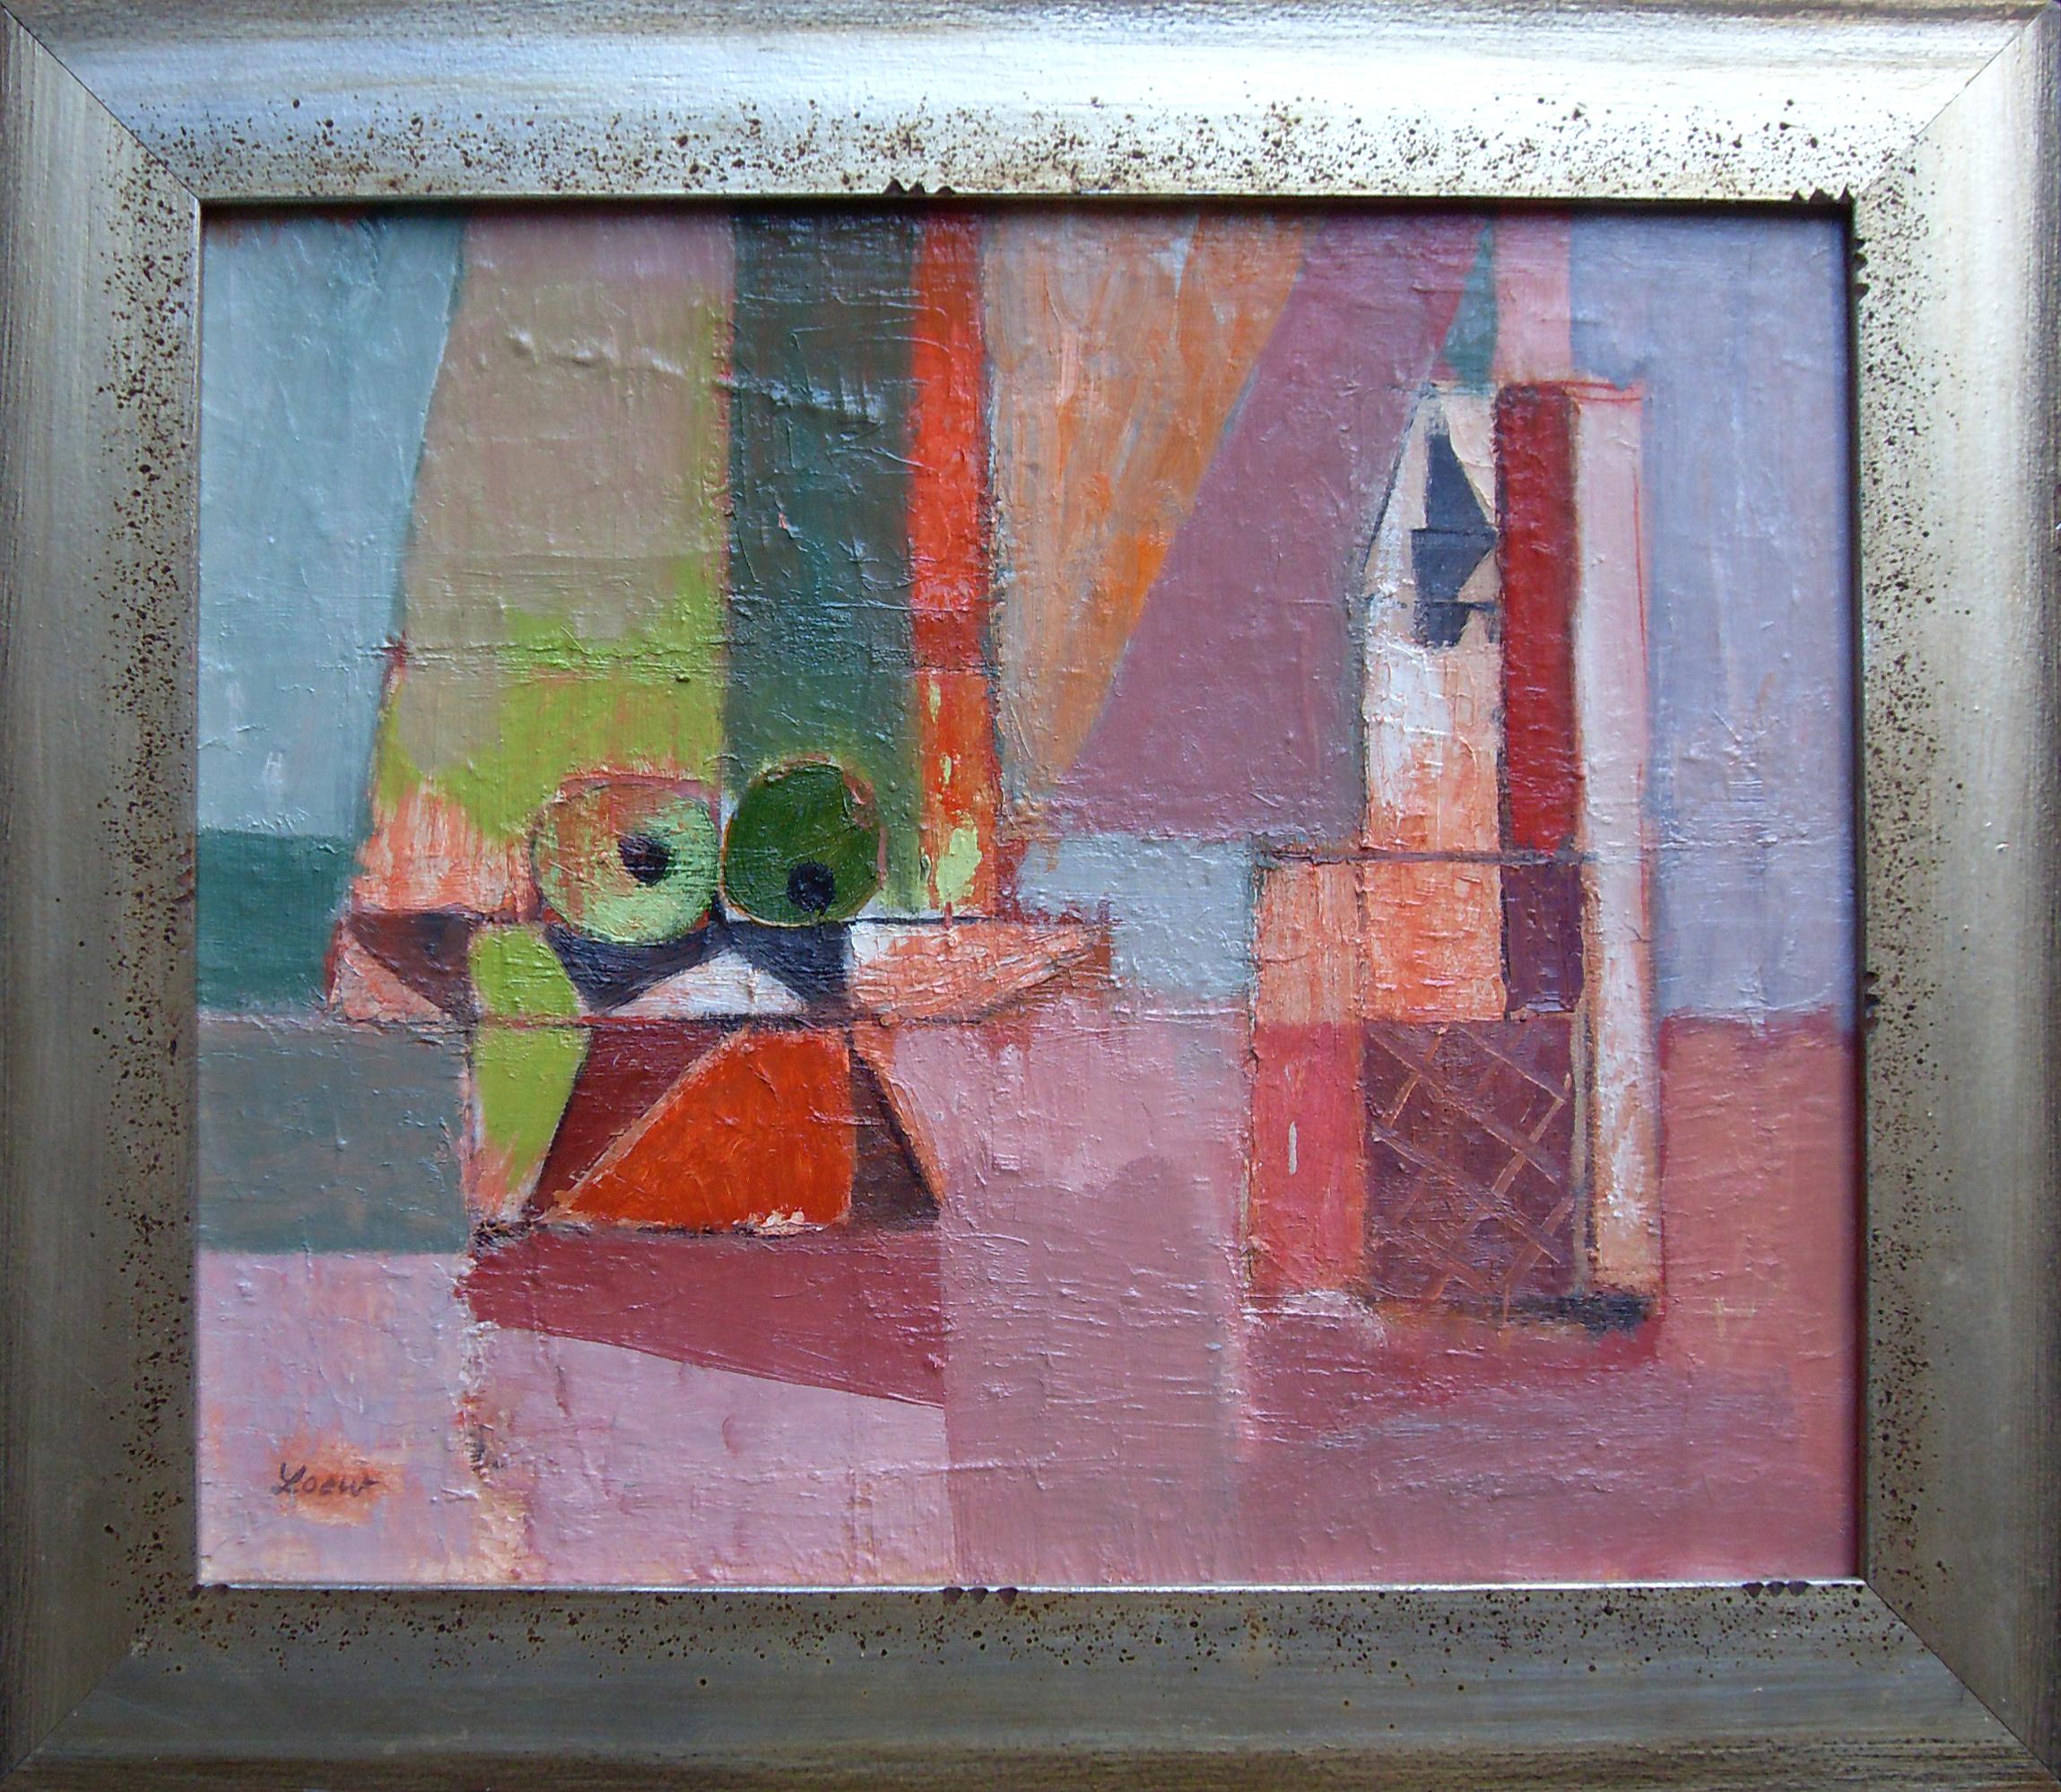 This abstract still-life painting, "Untitled (Still Life ML01)", by Michael Loew is done in the abstract expressionist style. Loew studied in the Ashcan School where he was heavily influenced by Willem de Kooning and Hans Hofmann. This particular